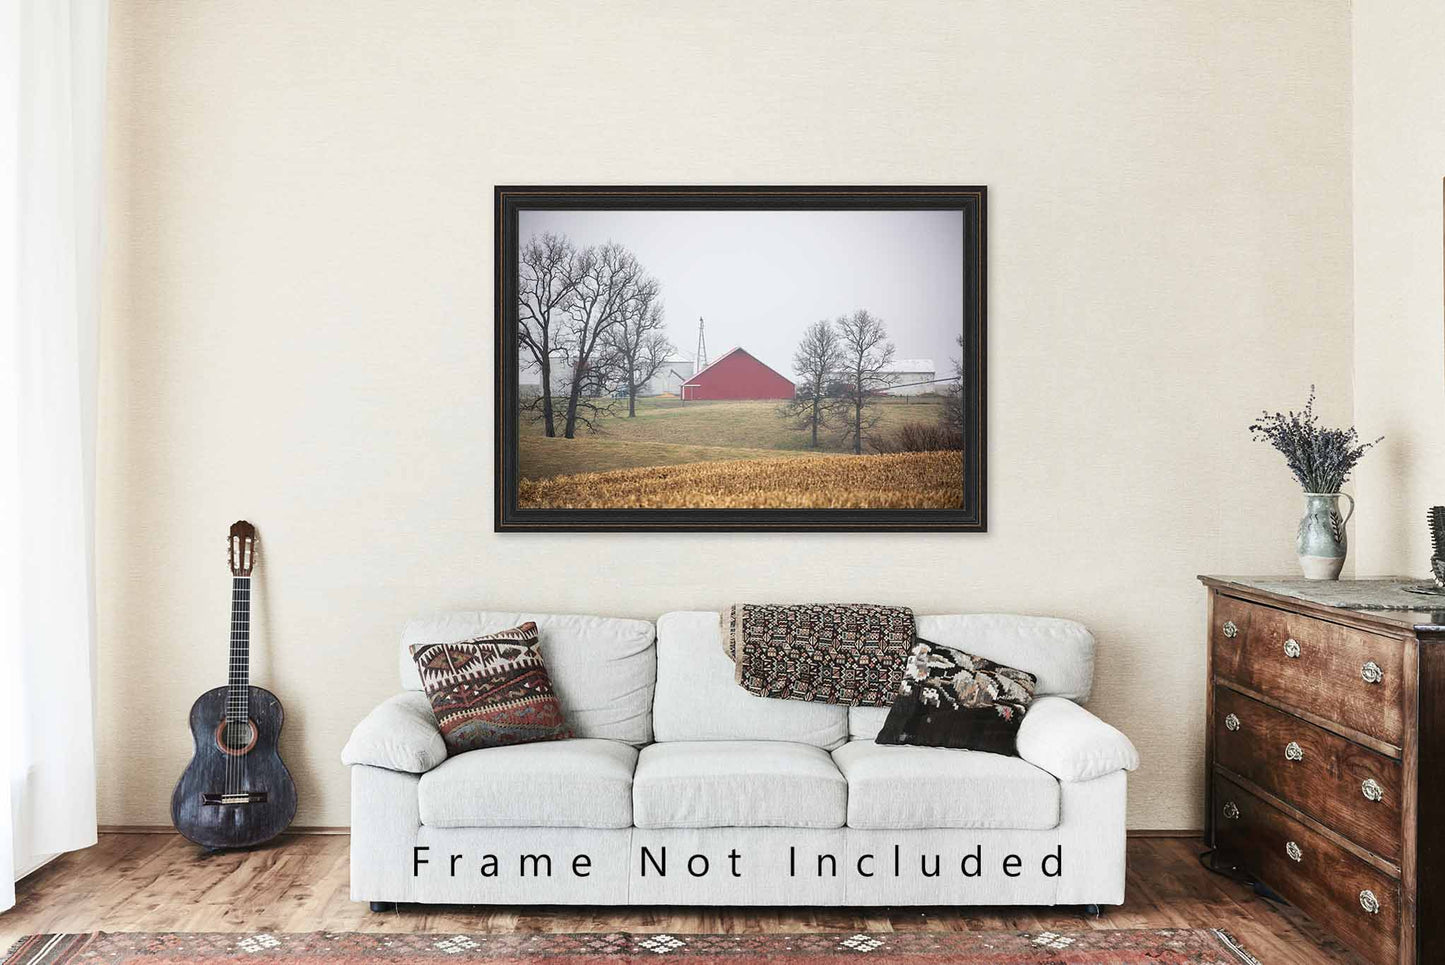 Farm Photography Print - Picture of Red Barn on Foggy Morning in Illinois - Country Wall Art Midwestern Photo Artwork Farmhouse Decor